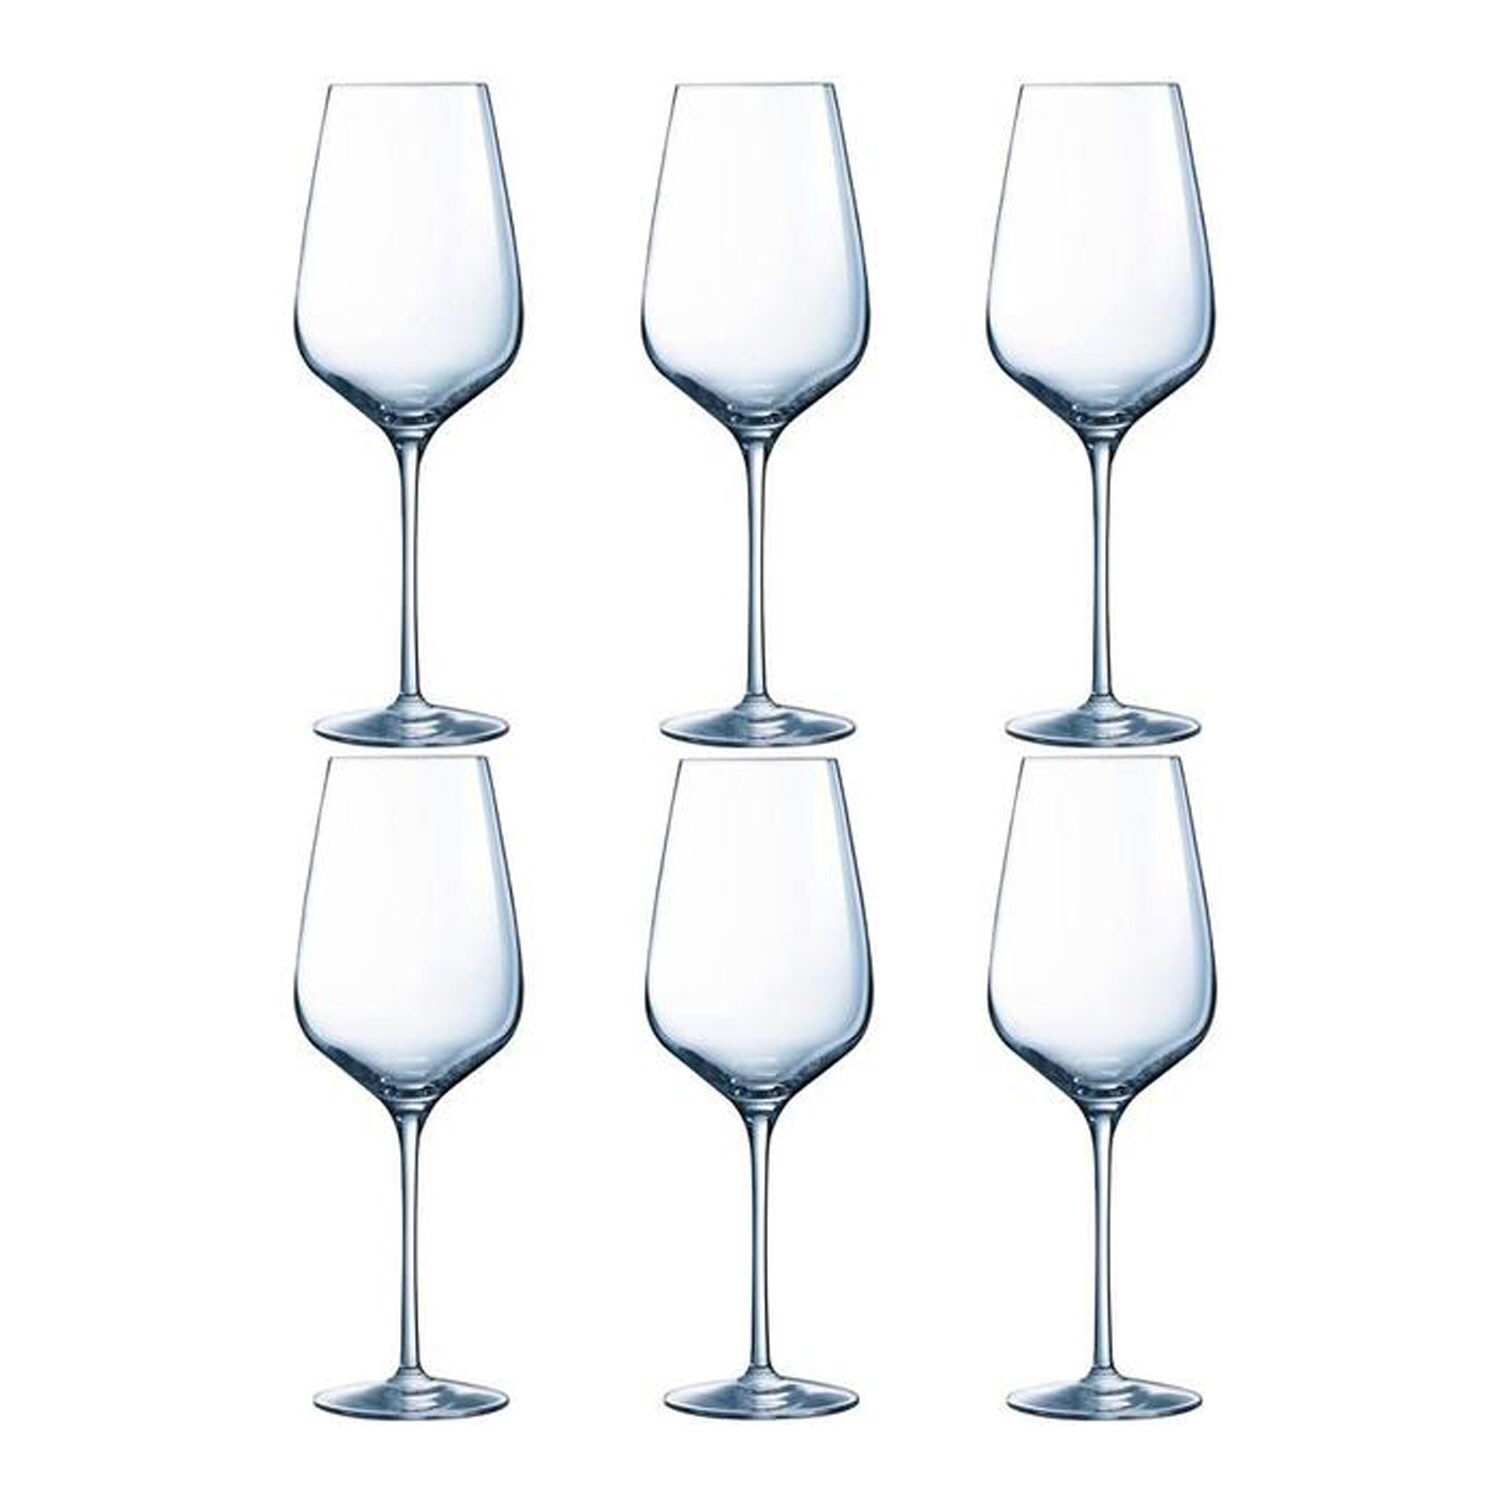 https://royaldesign.com/image/2/chefsommelier-sublym-white-wine-glass-45-cl-6-pack-0